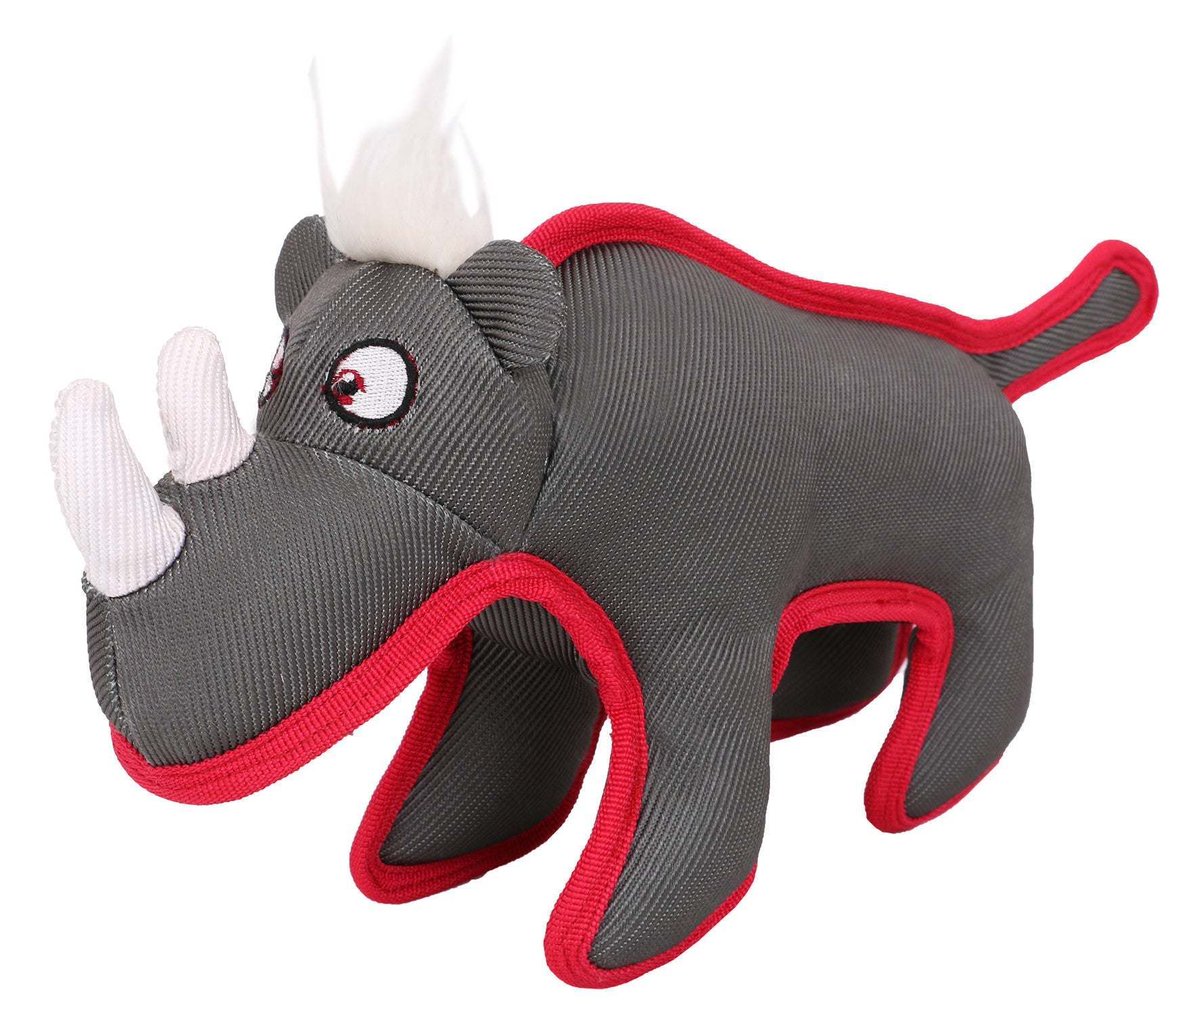 PET LIFE ANIMAL DURA-CHEW REINFORCE STITCHED DURABLE WATER RESISTANT PLUSH CHEW TUGGING DOG TOY

platinumdogsupply.com/products/view/… 

#pettoys #pets #dog #dogtoys #petaccessories #pet #dogsofinstagram #petfood #dogs #petsupplies #petsofinstagram #petproducts